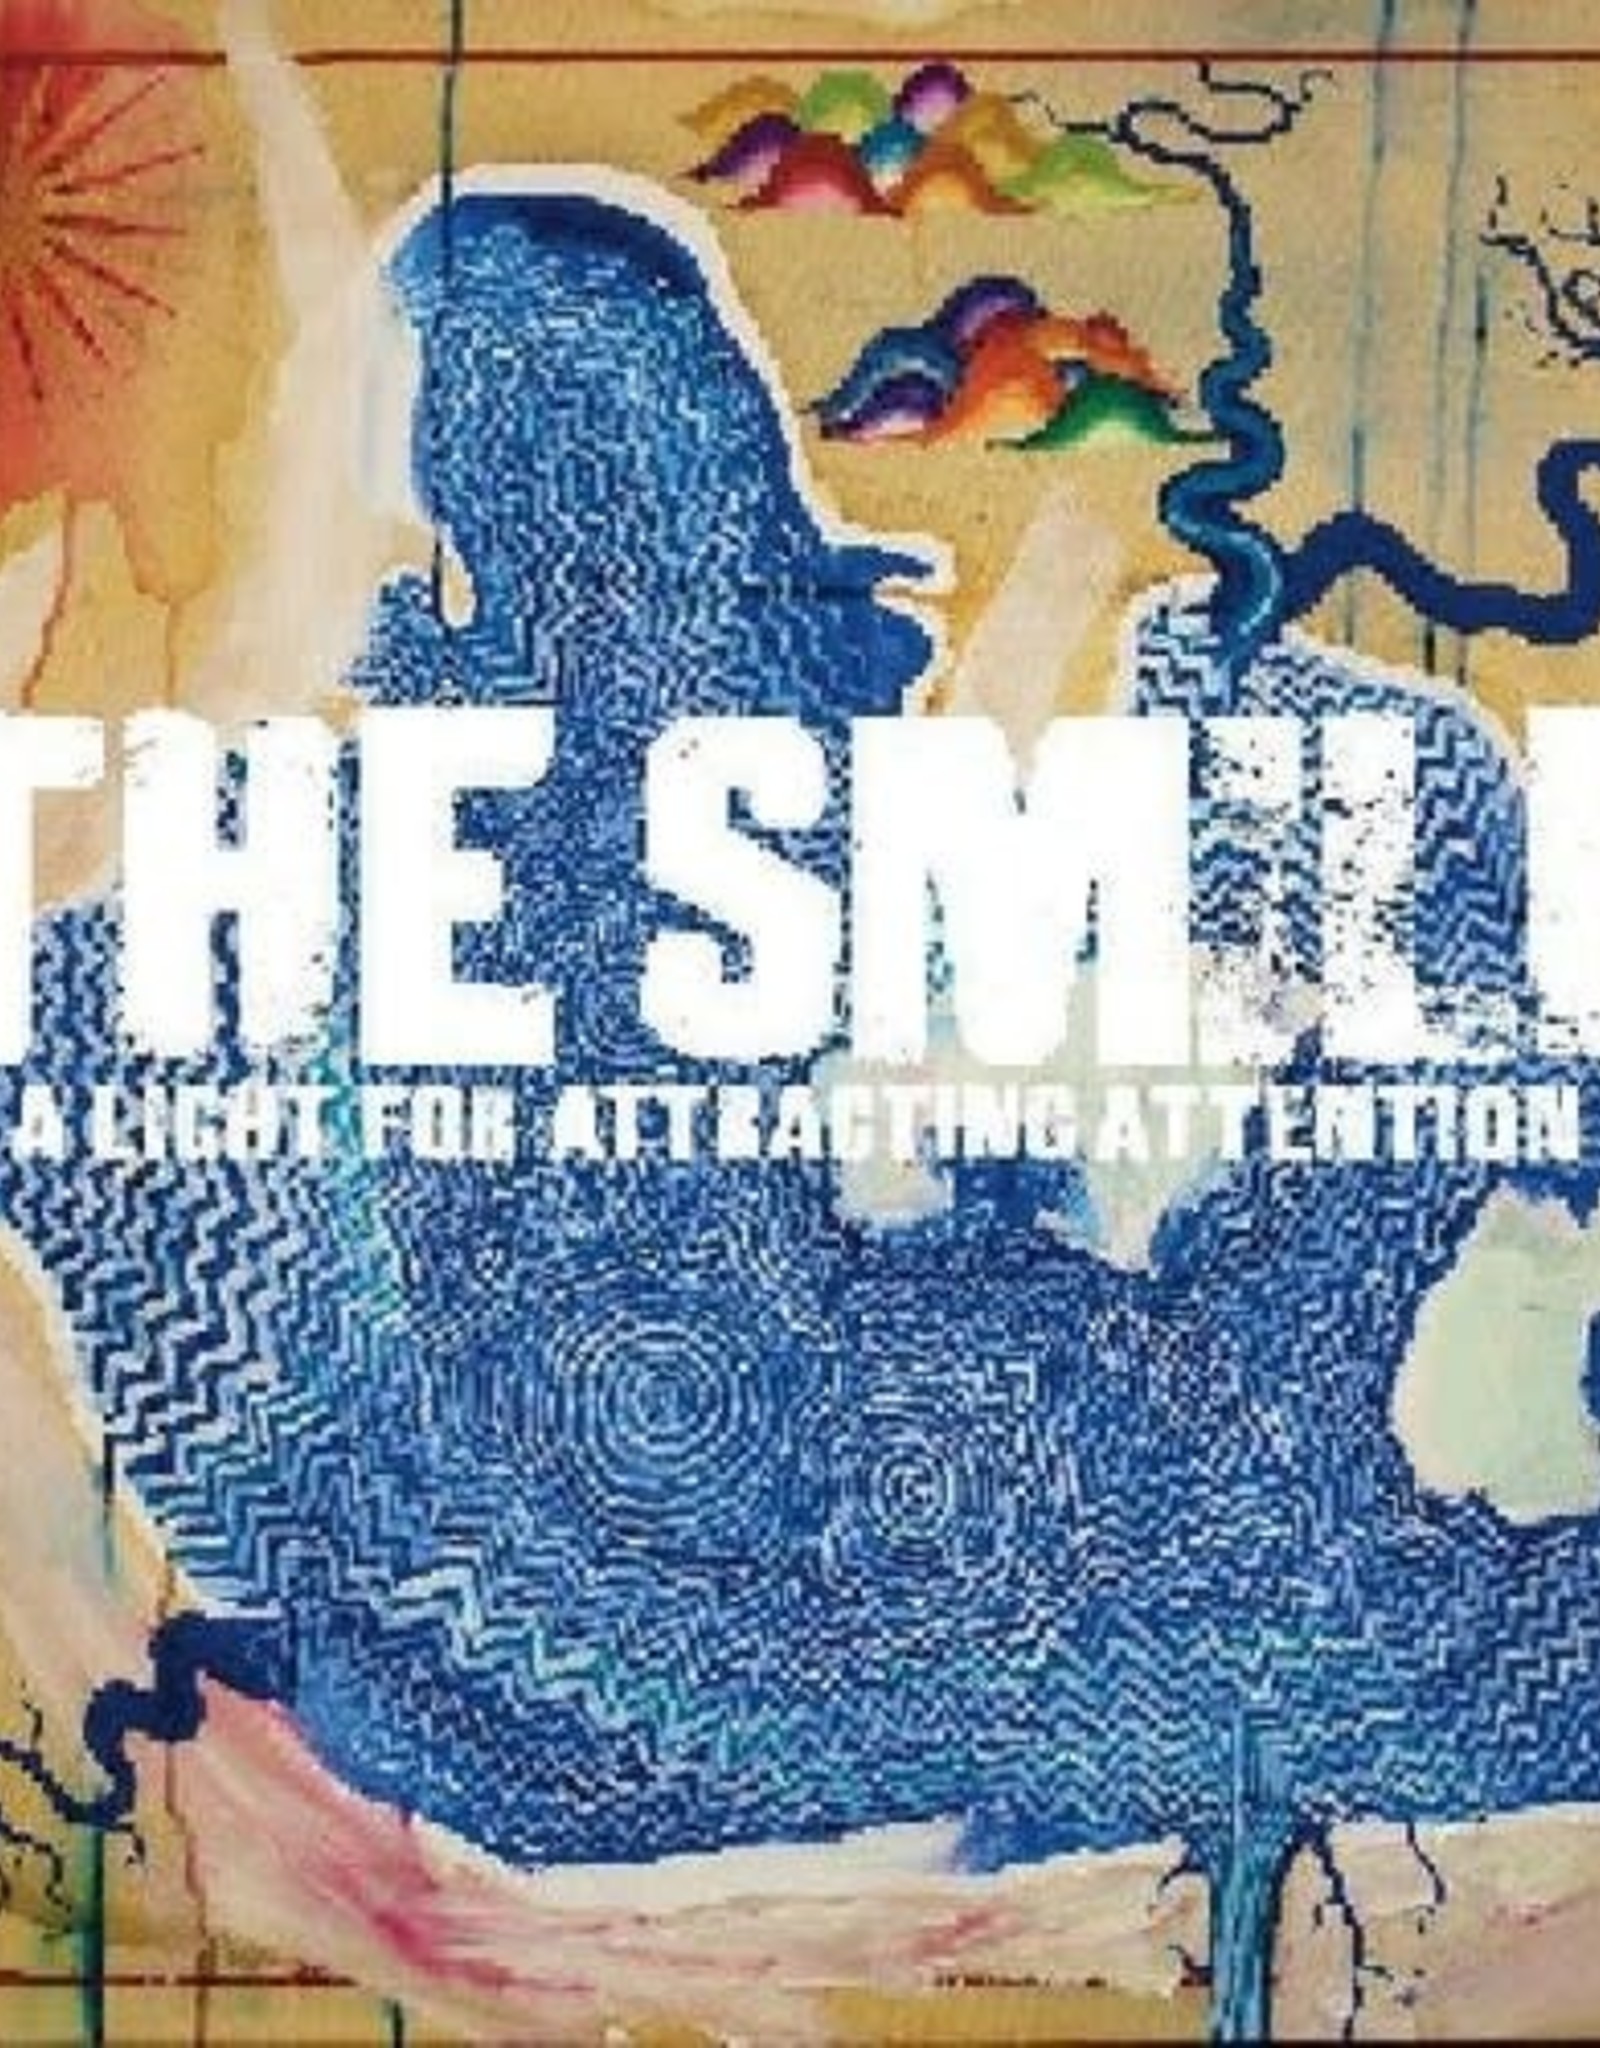 The Smile - A Light for Attracting Attention (Yellow Vinyl)